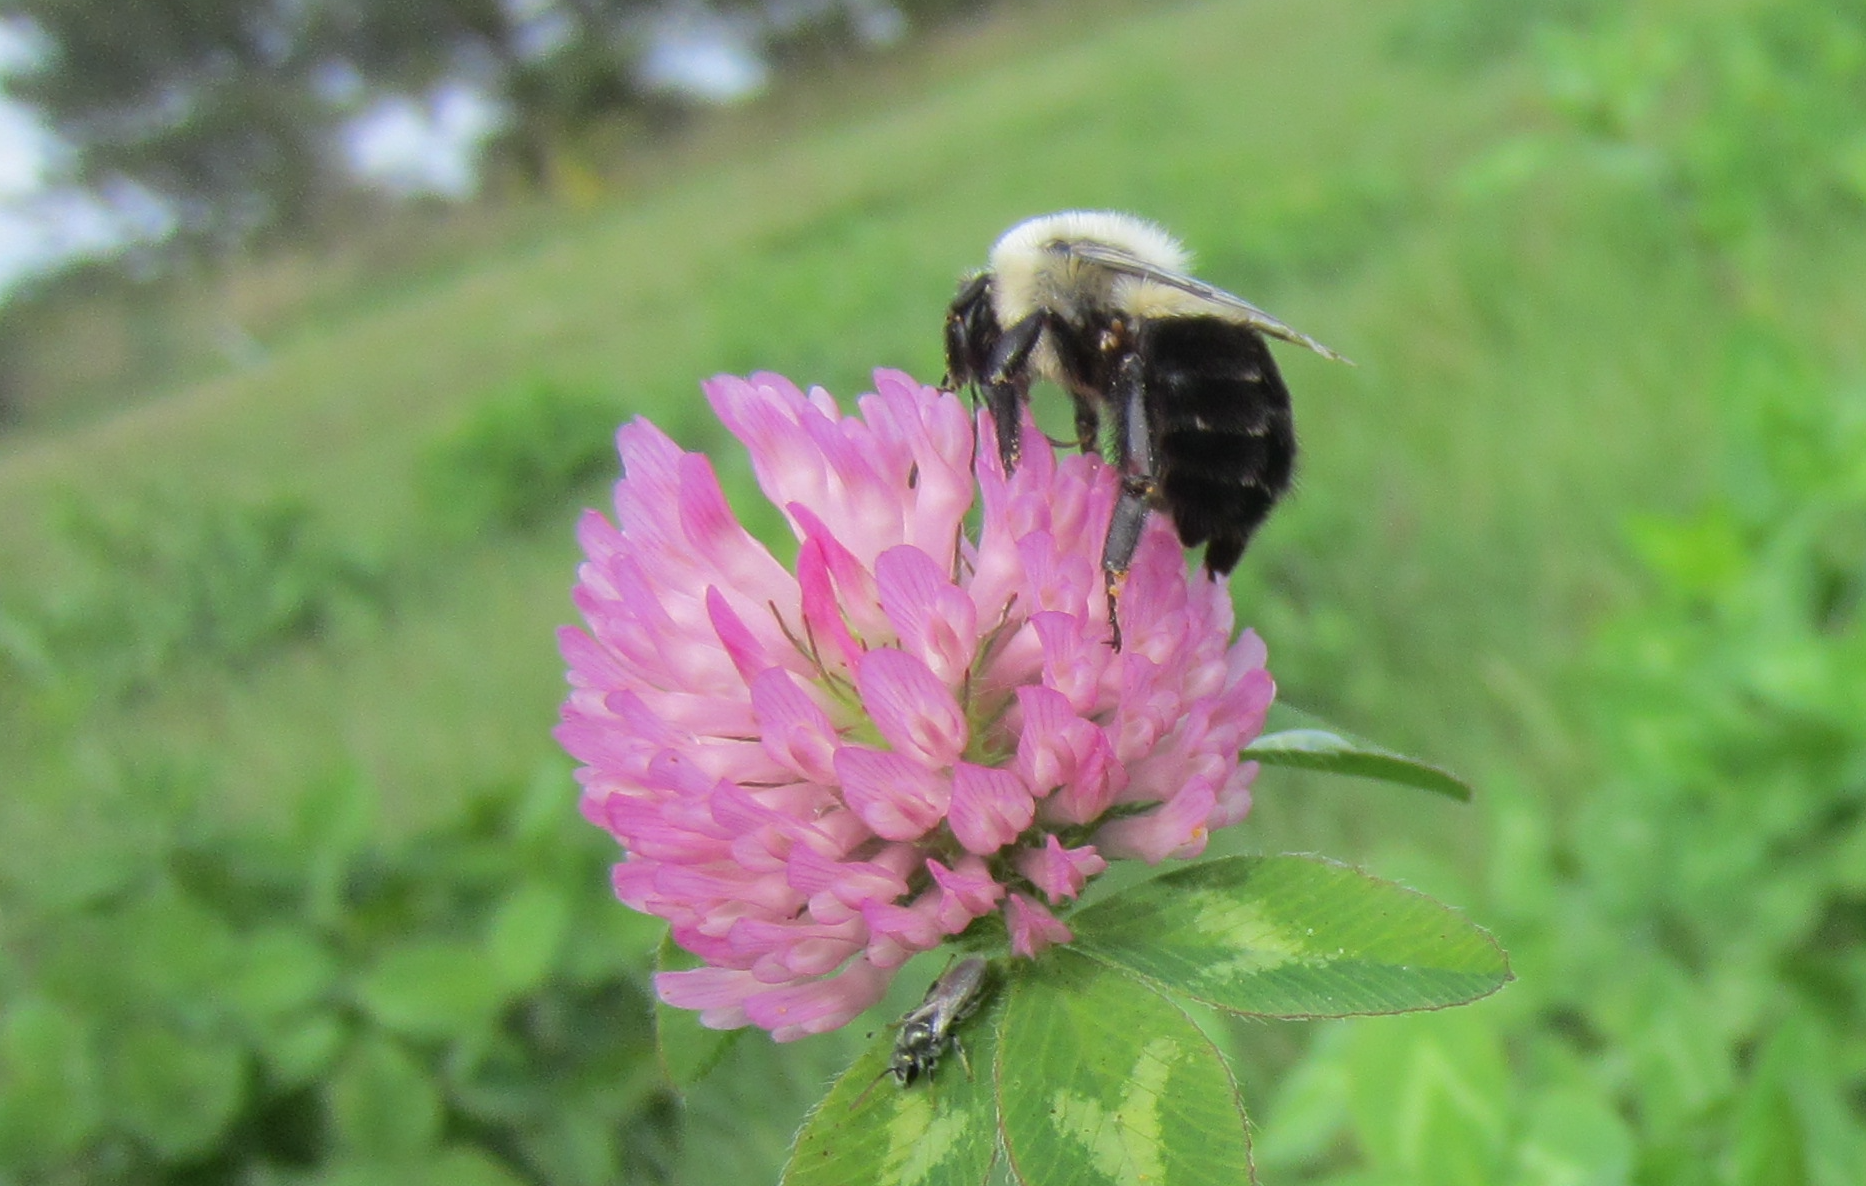 Link to Red clover/cover crops image and post